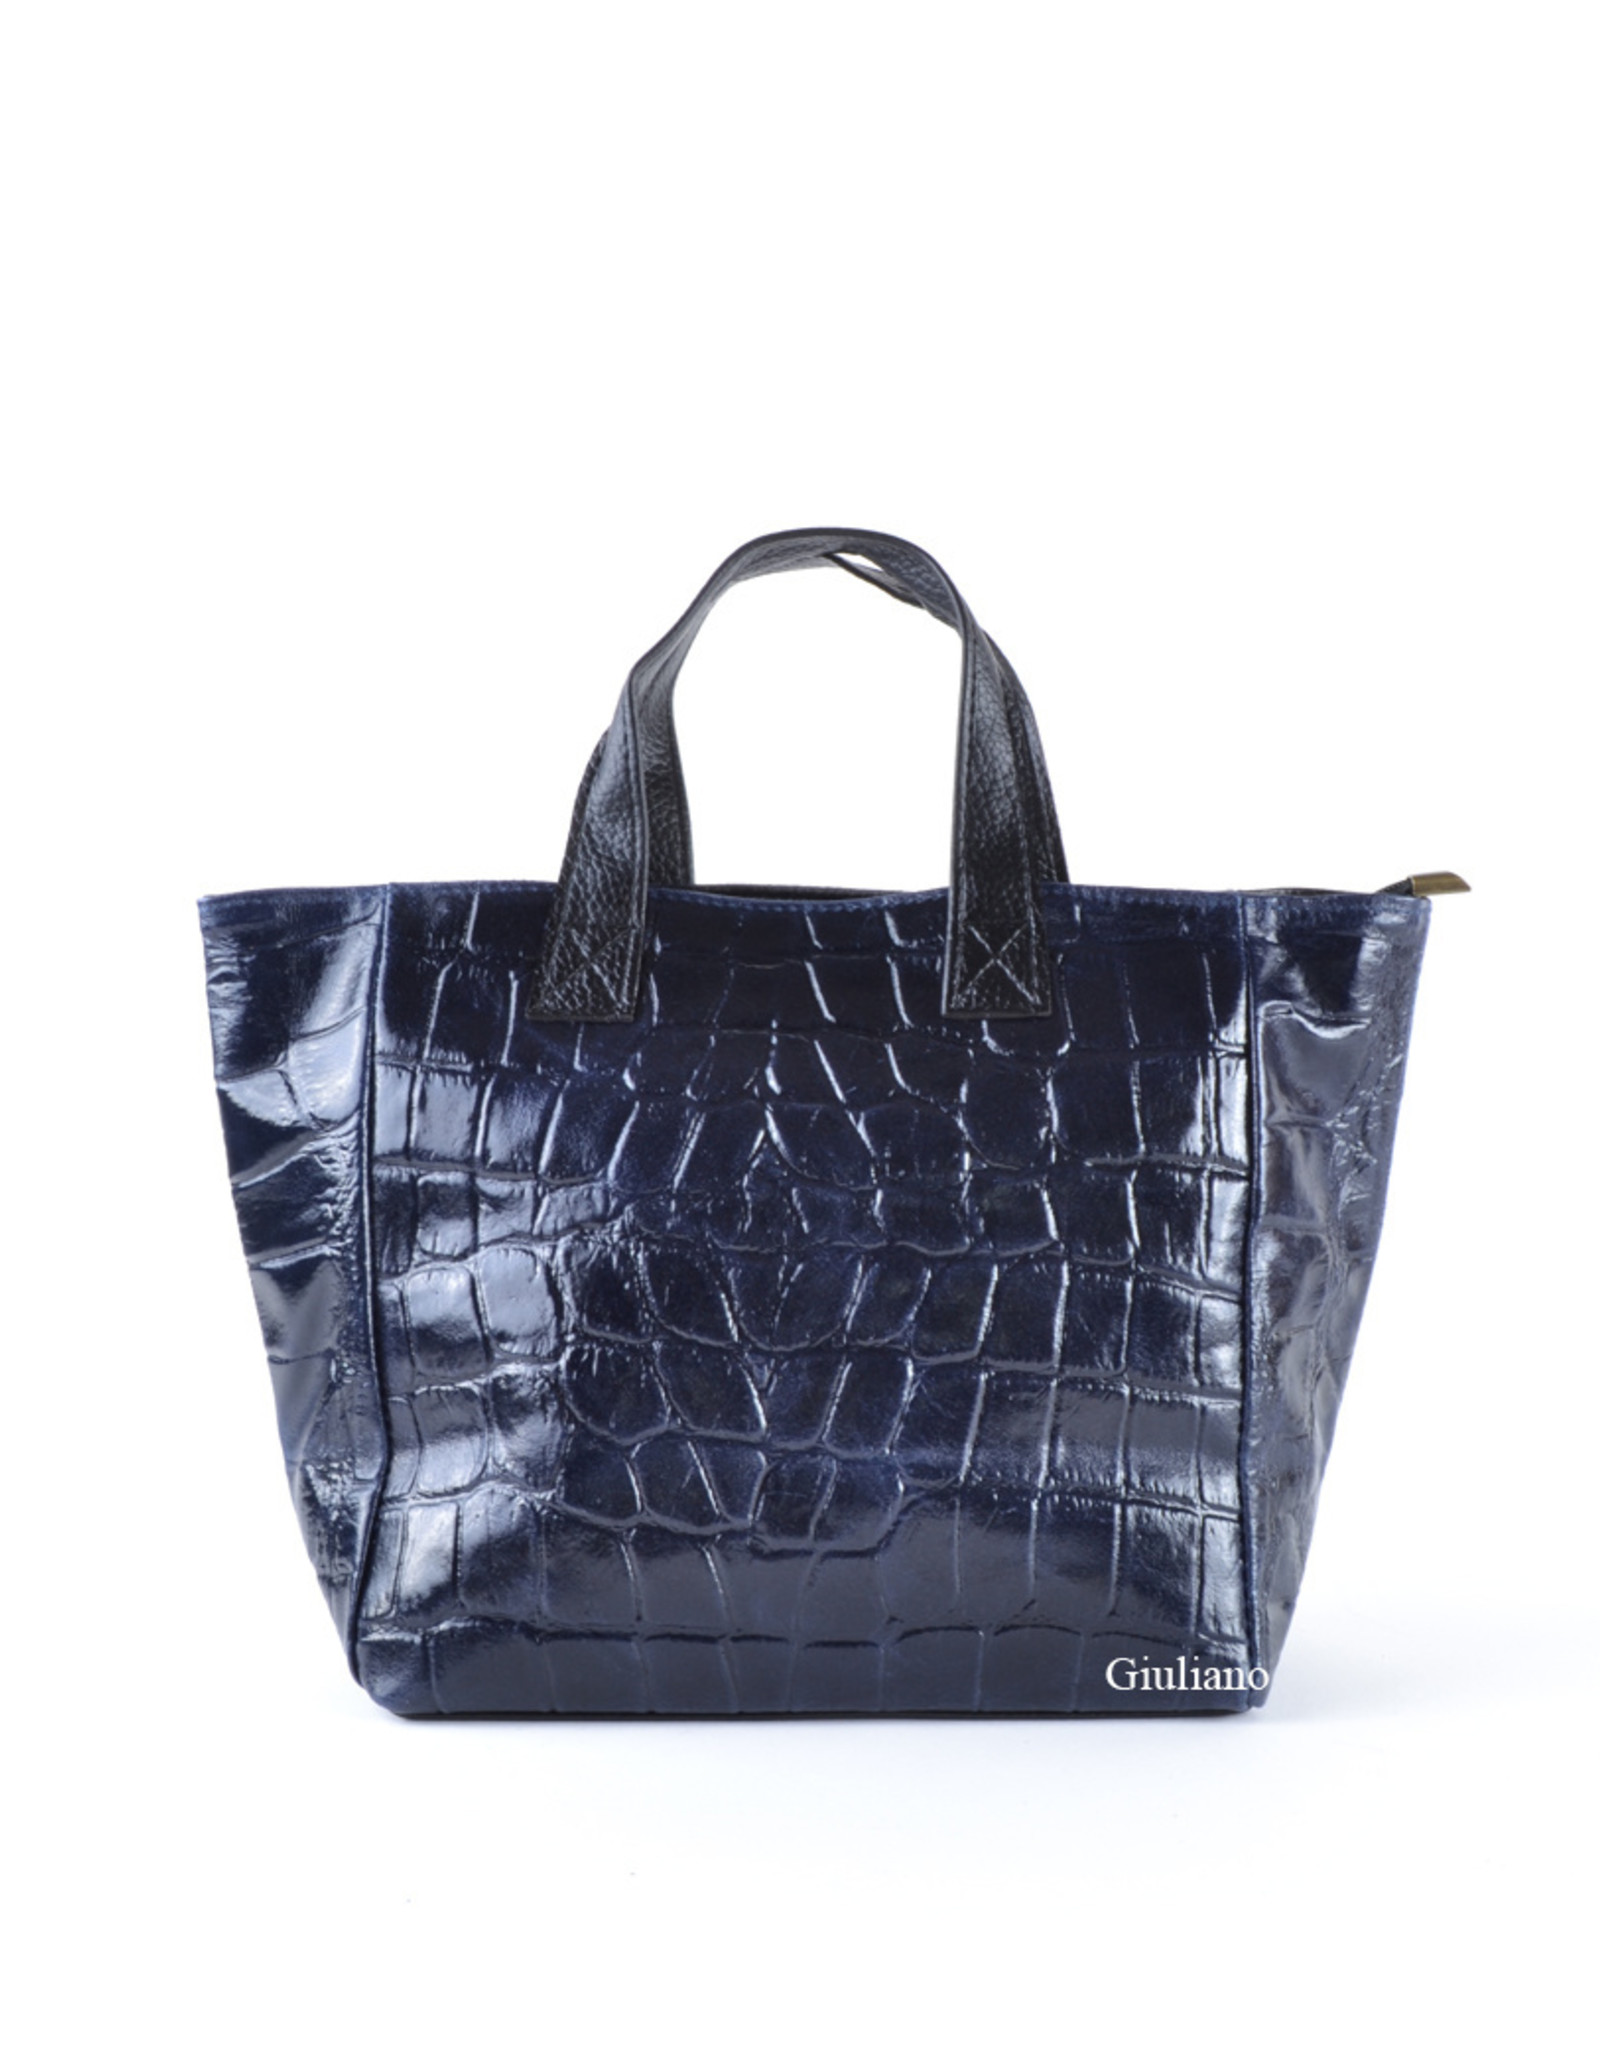 Crocco leather little bag in dark blue